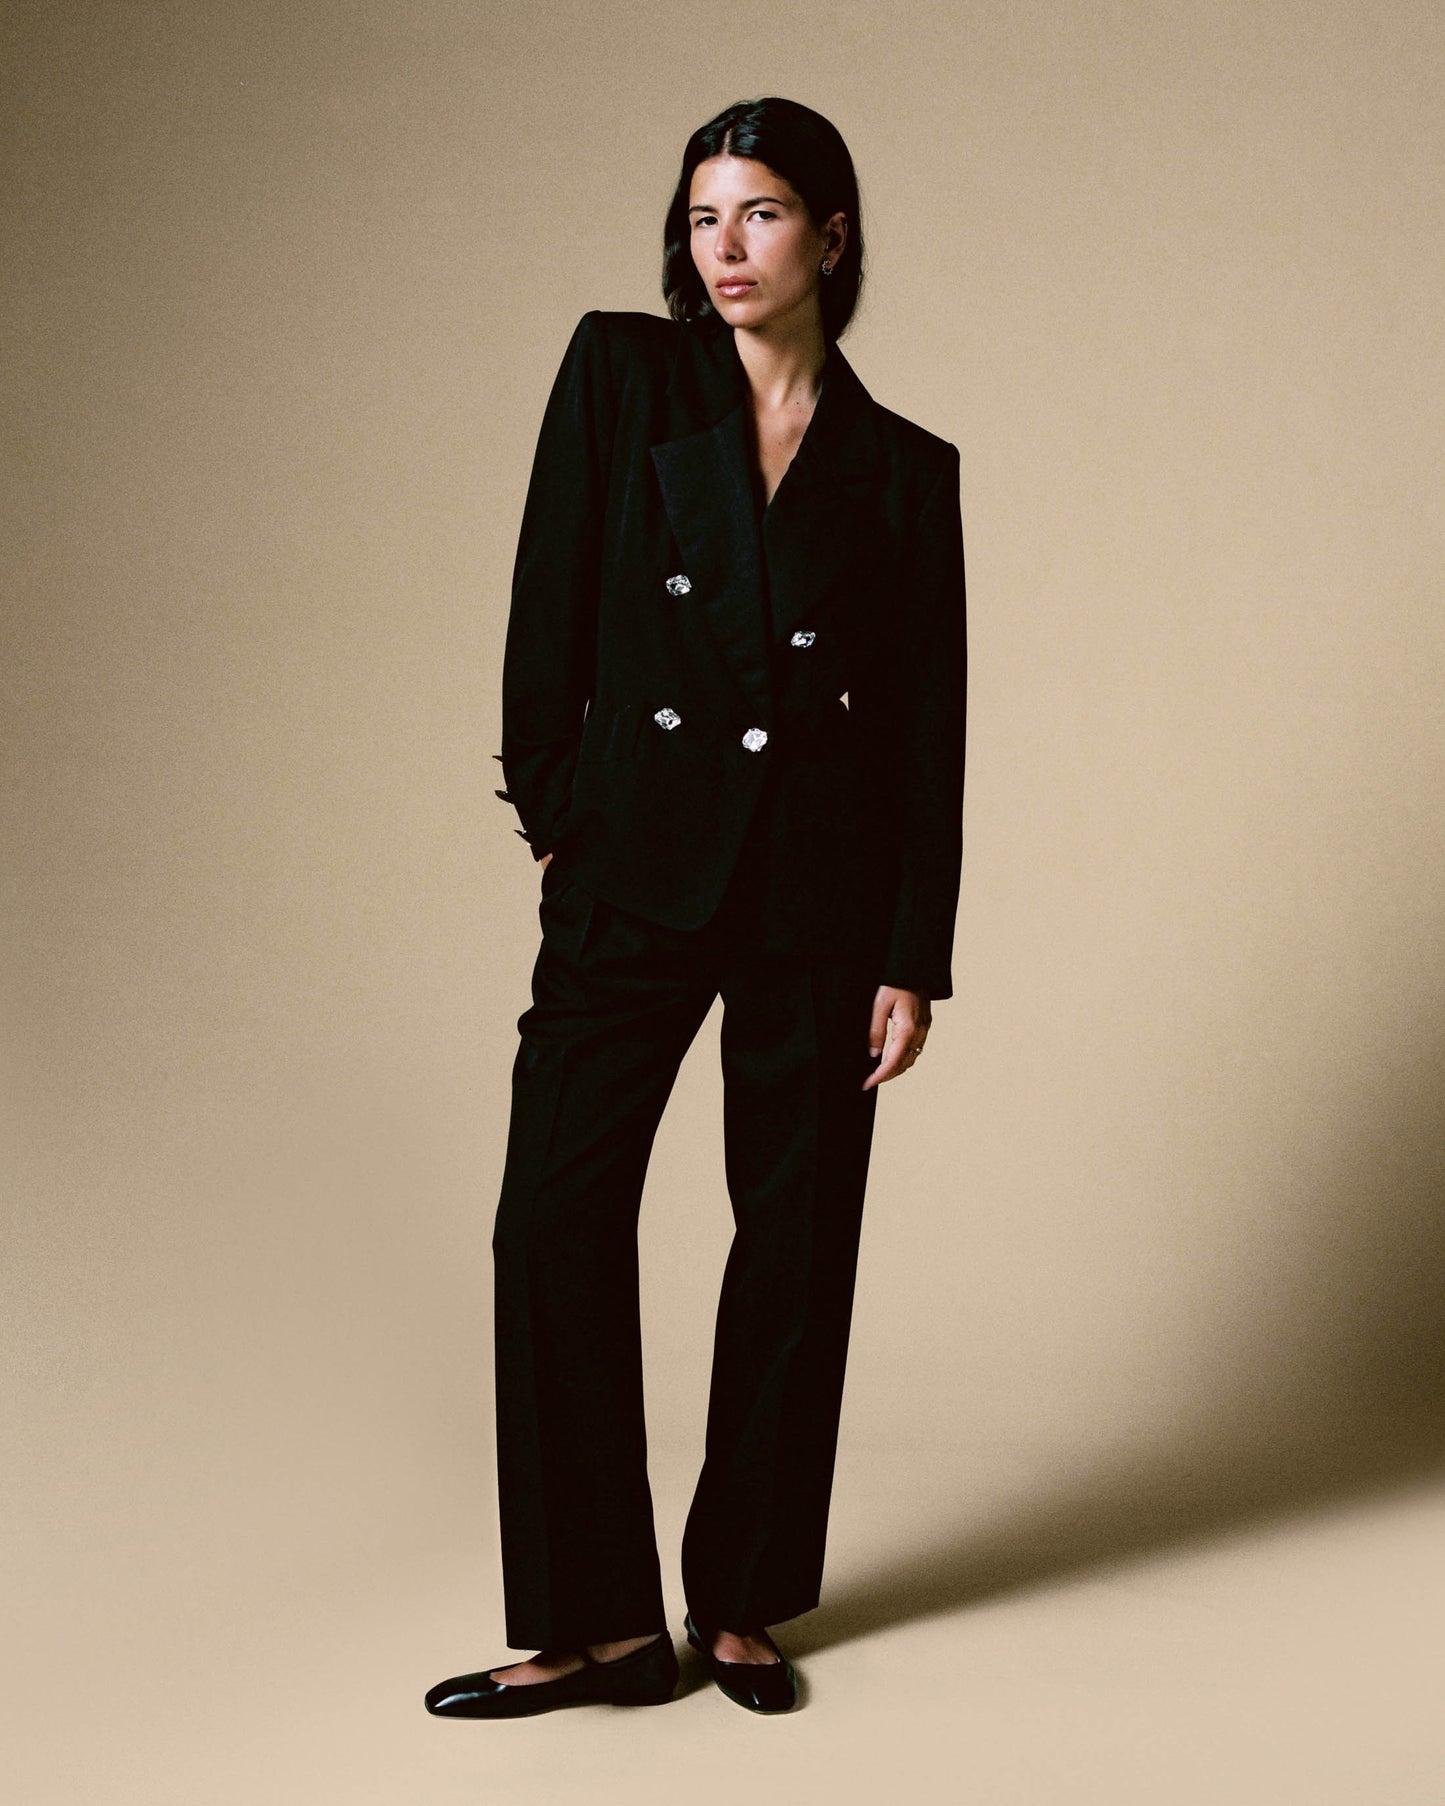 FALLON-suit-yves saint laurent-ysl-black-wool-vintage-women-luxury-clothing-rare-fashion-curated-art-collection